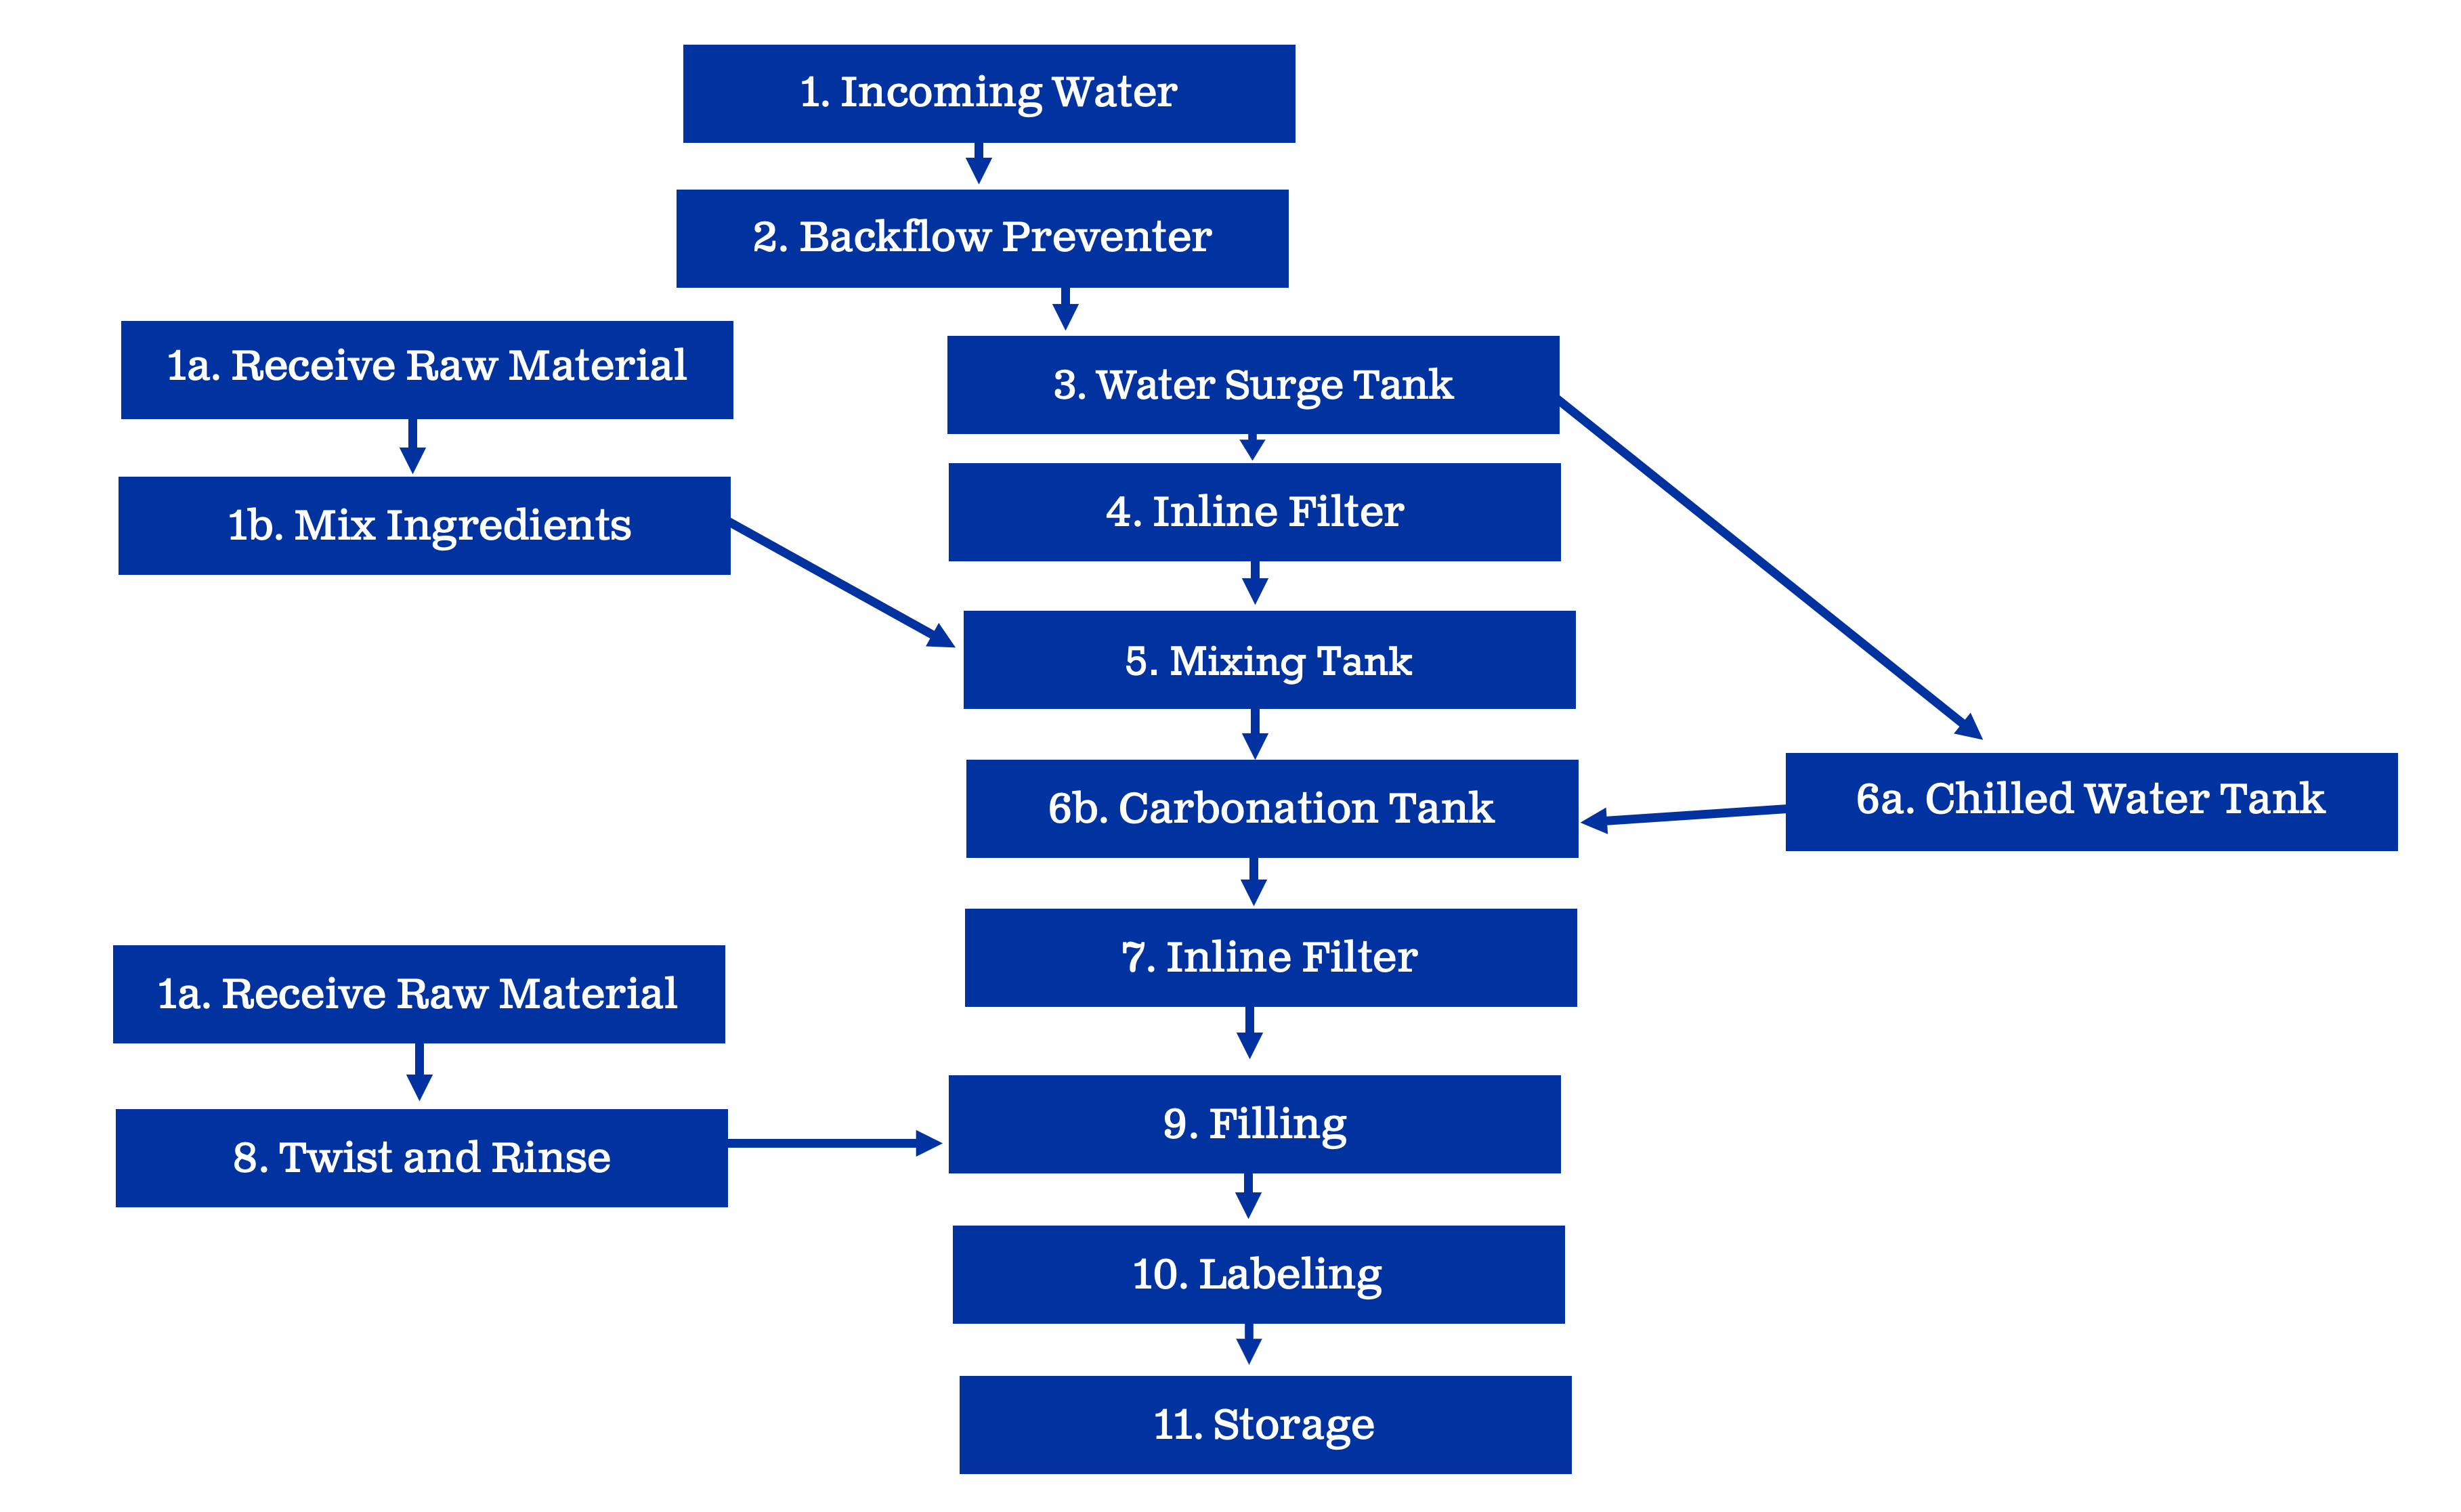 Flow diagram for outlining eleven primary steps and three side-steps for safely filtering and bottling an energy drink. For an in-depth description of this graphic, please contact Curtis Braun by email at curtis.braun@sdstate.e3du or SDSU Extension by phone at 605.688.4792 